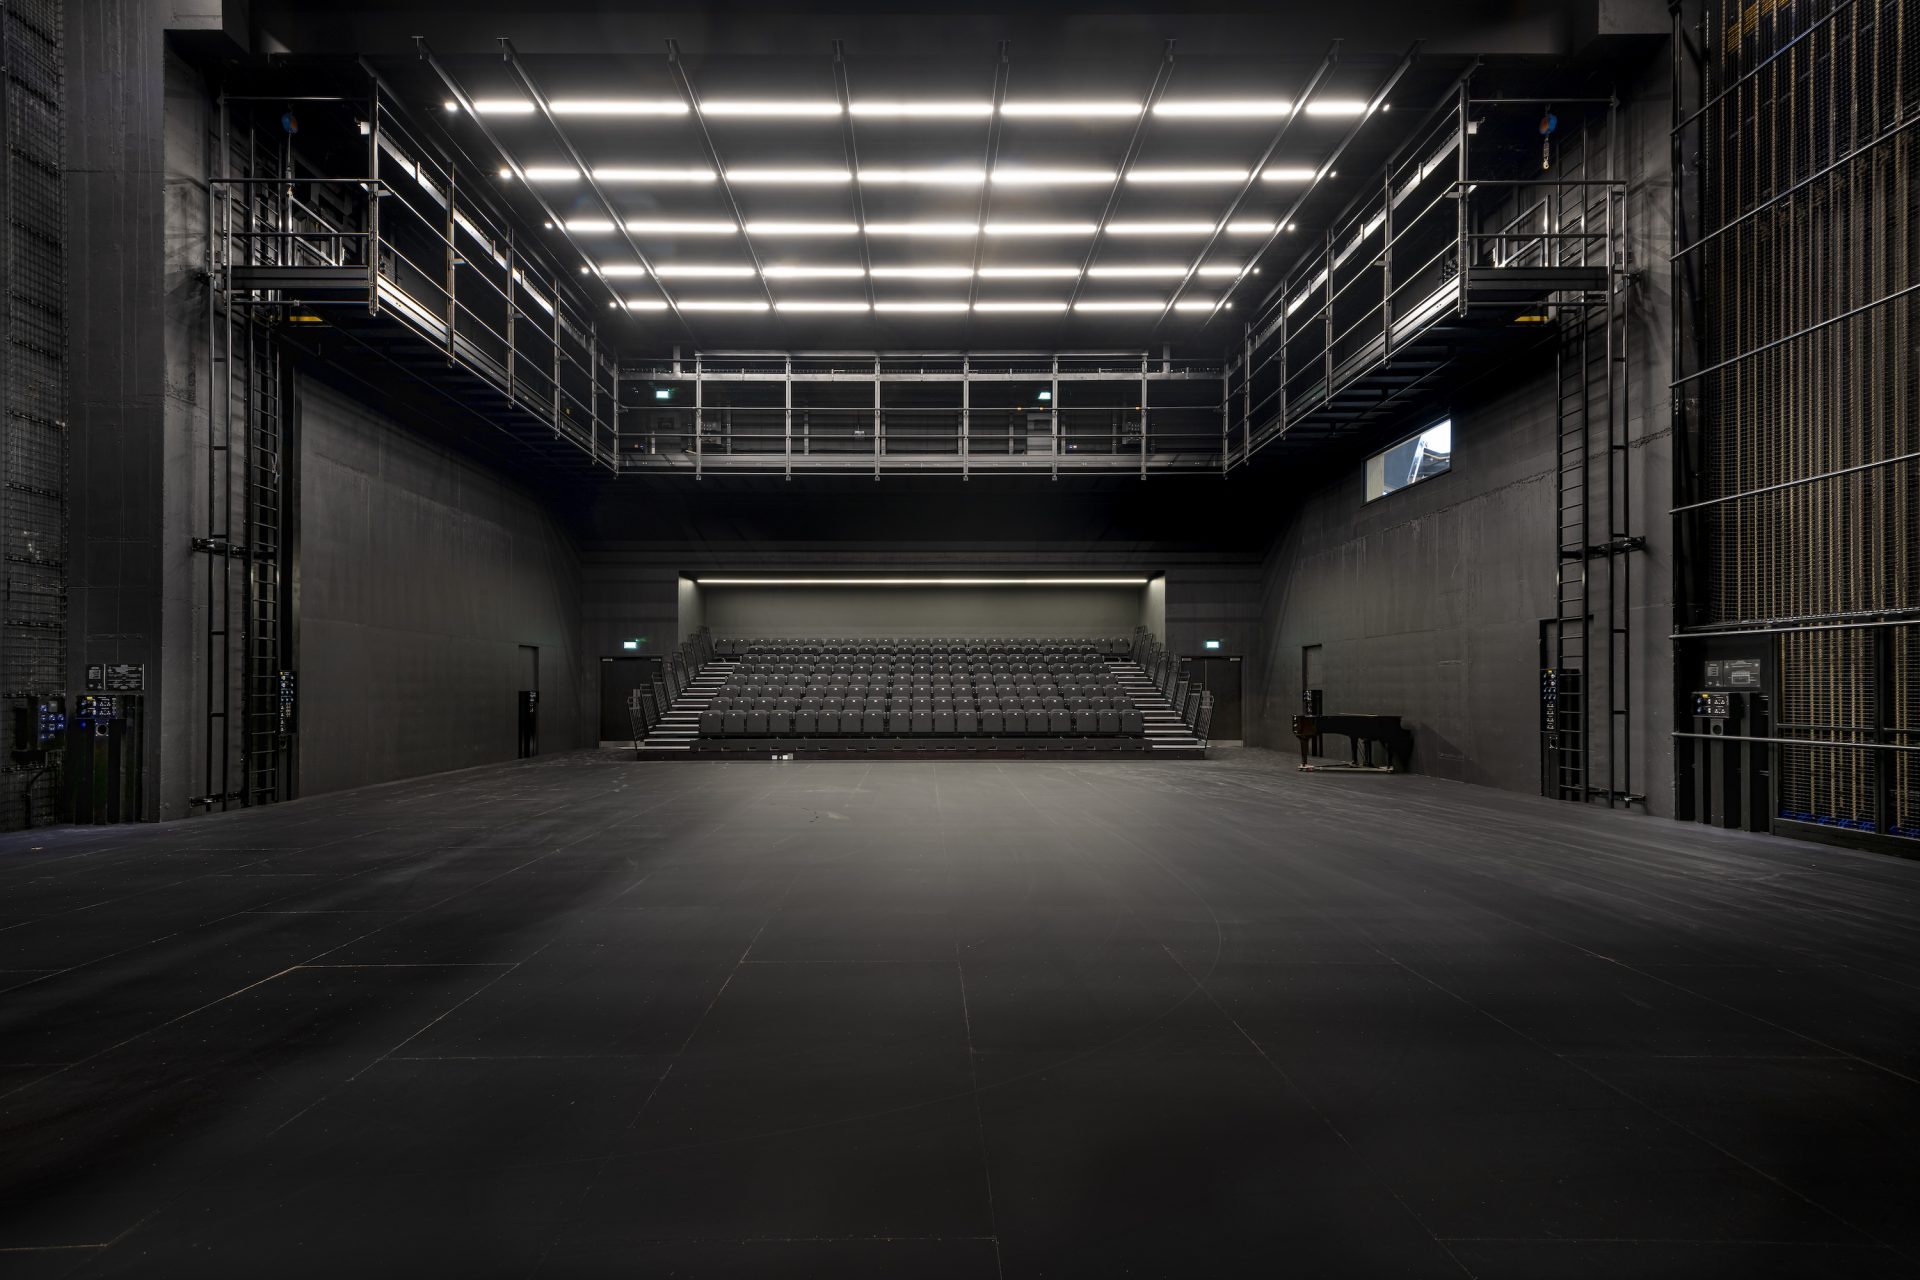 A production studio rental space, with black walls and seating at the back.